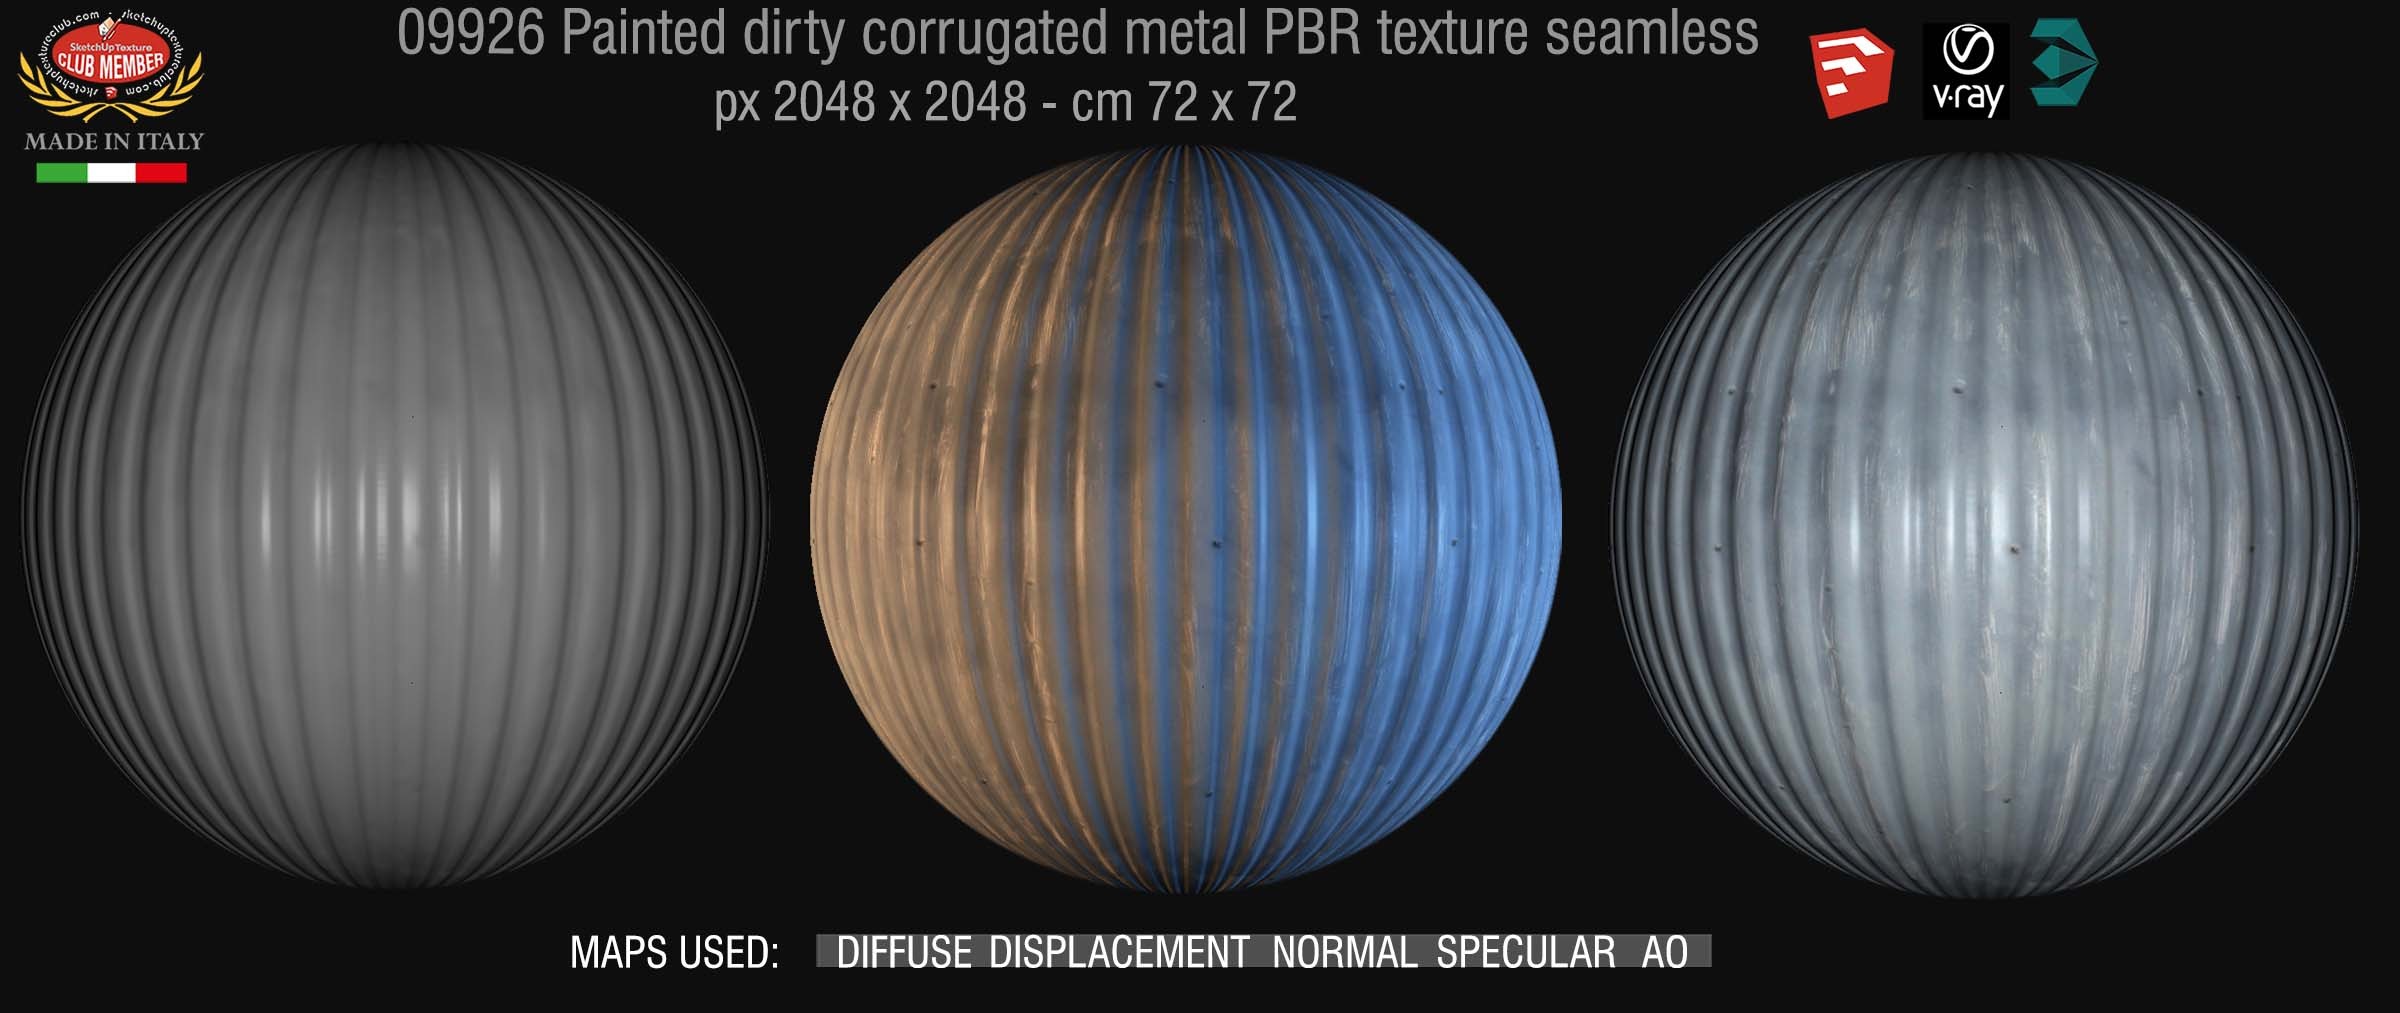 09926 Painted dirty corrugated metal PBR texture seamless DEMO